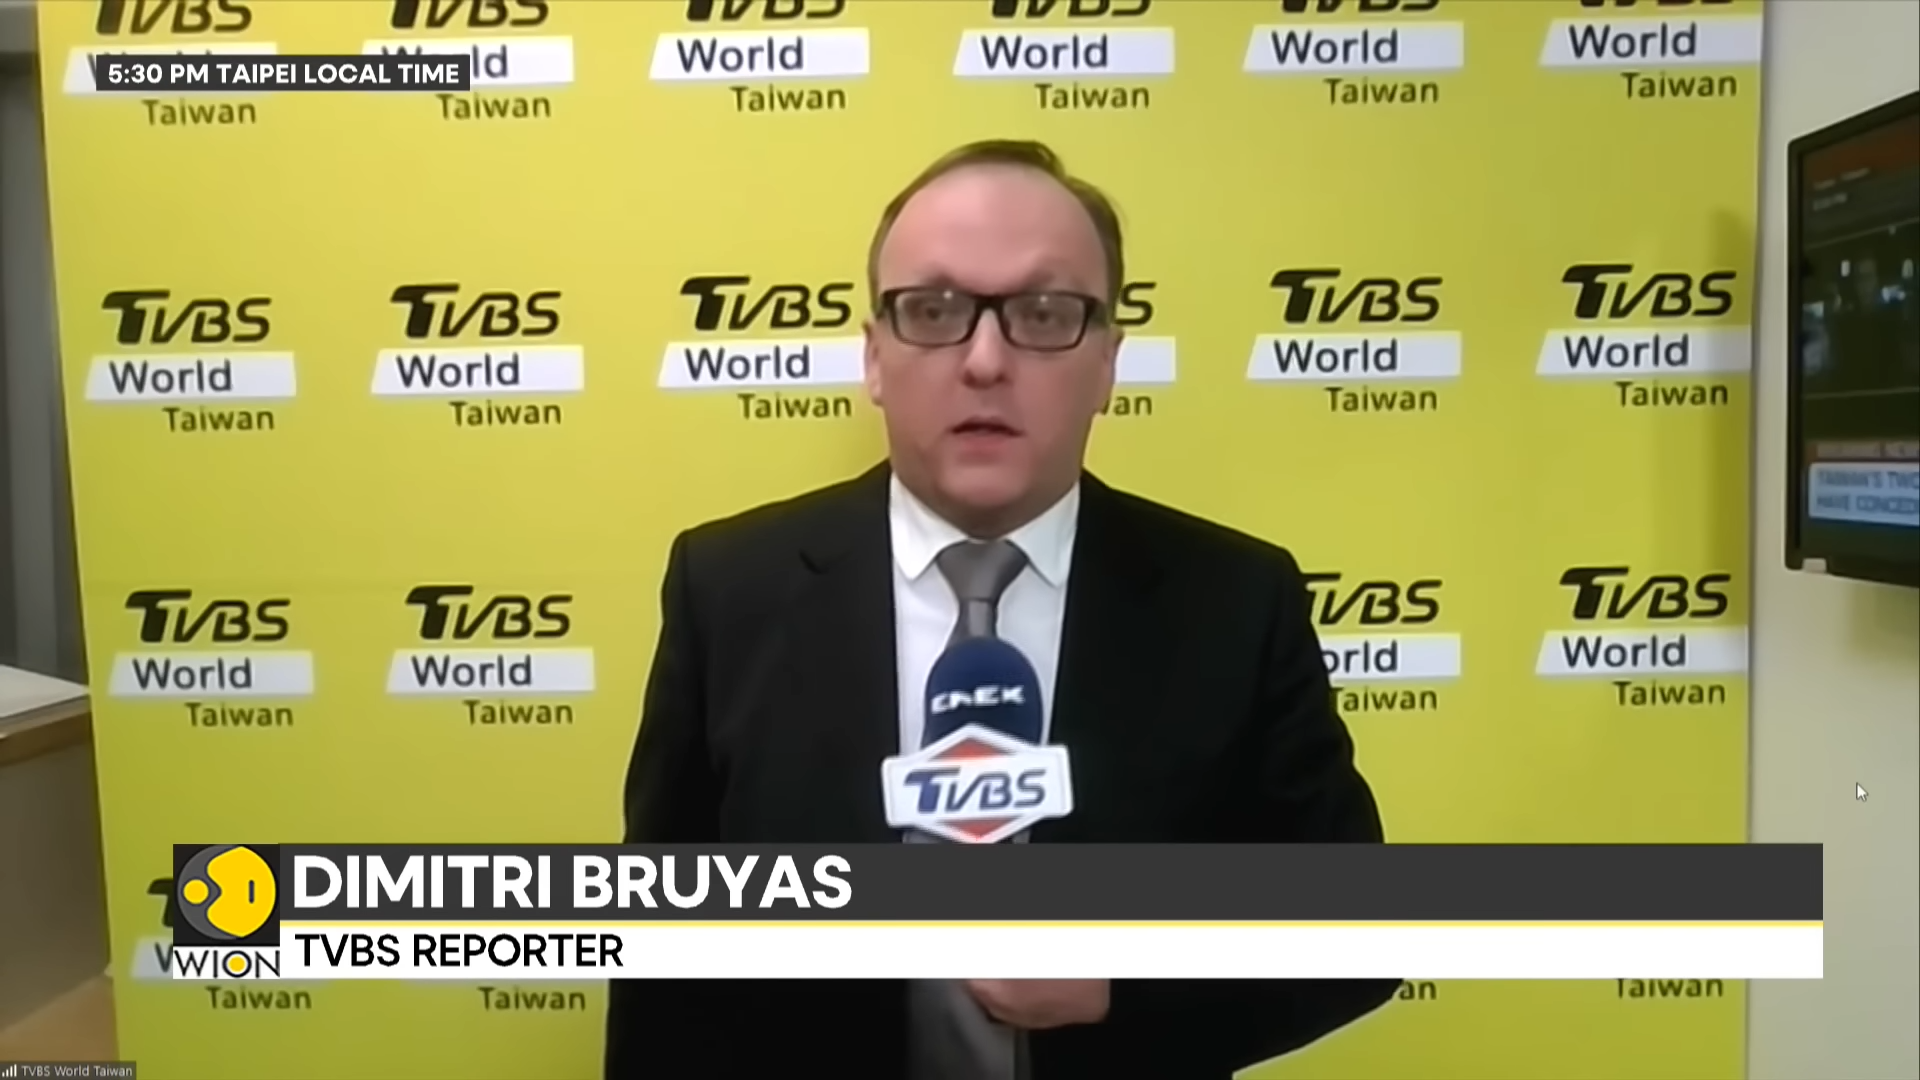 In a noteworthy segment, Dimitri Bruyas, the head of English news, engaged in an insightful online discussion with anchors.